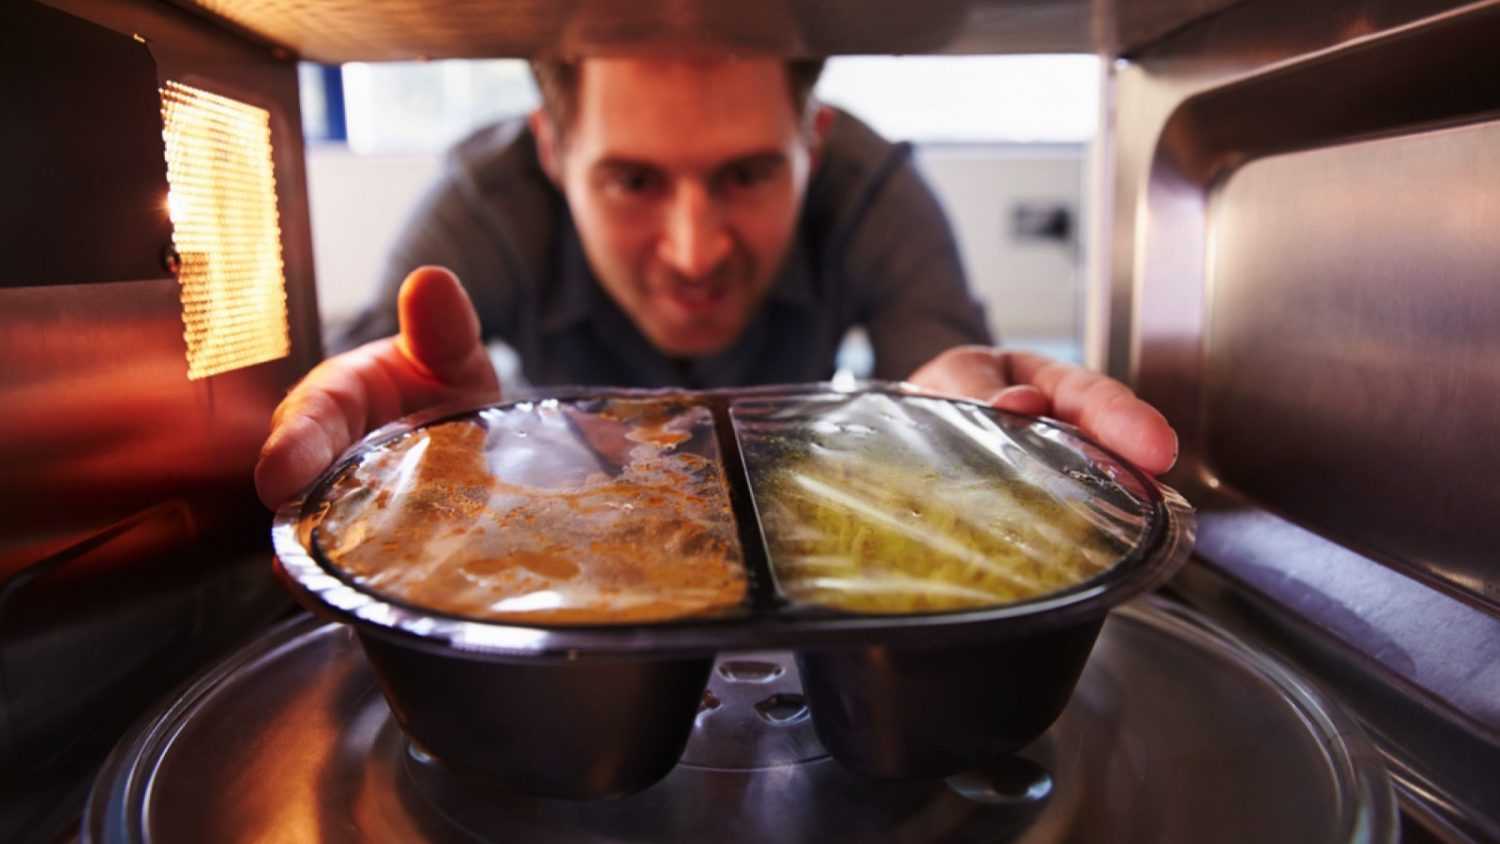 Man heating food in oven